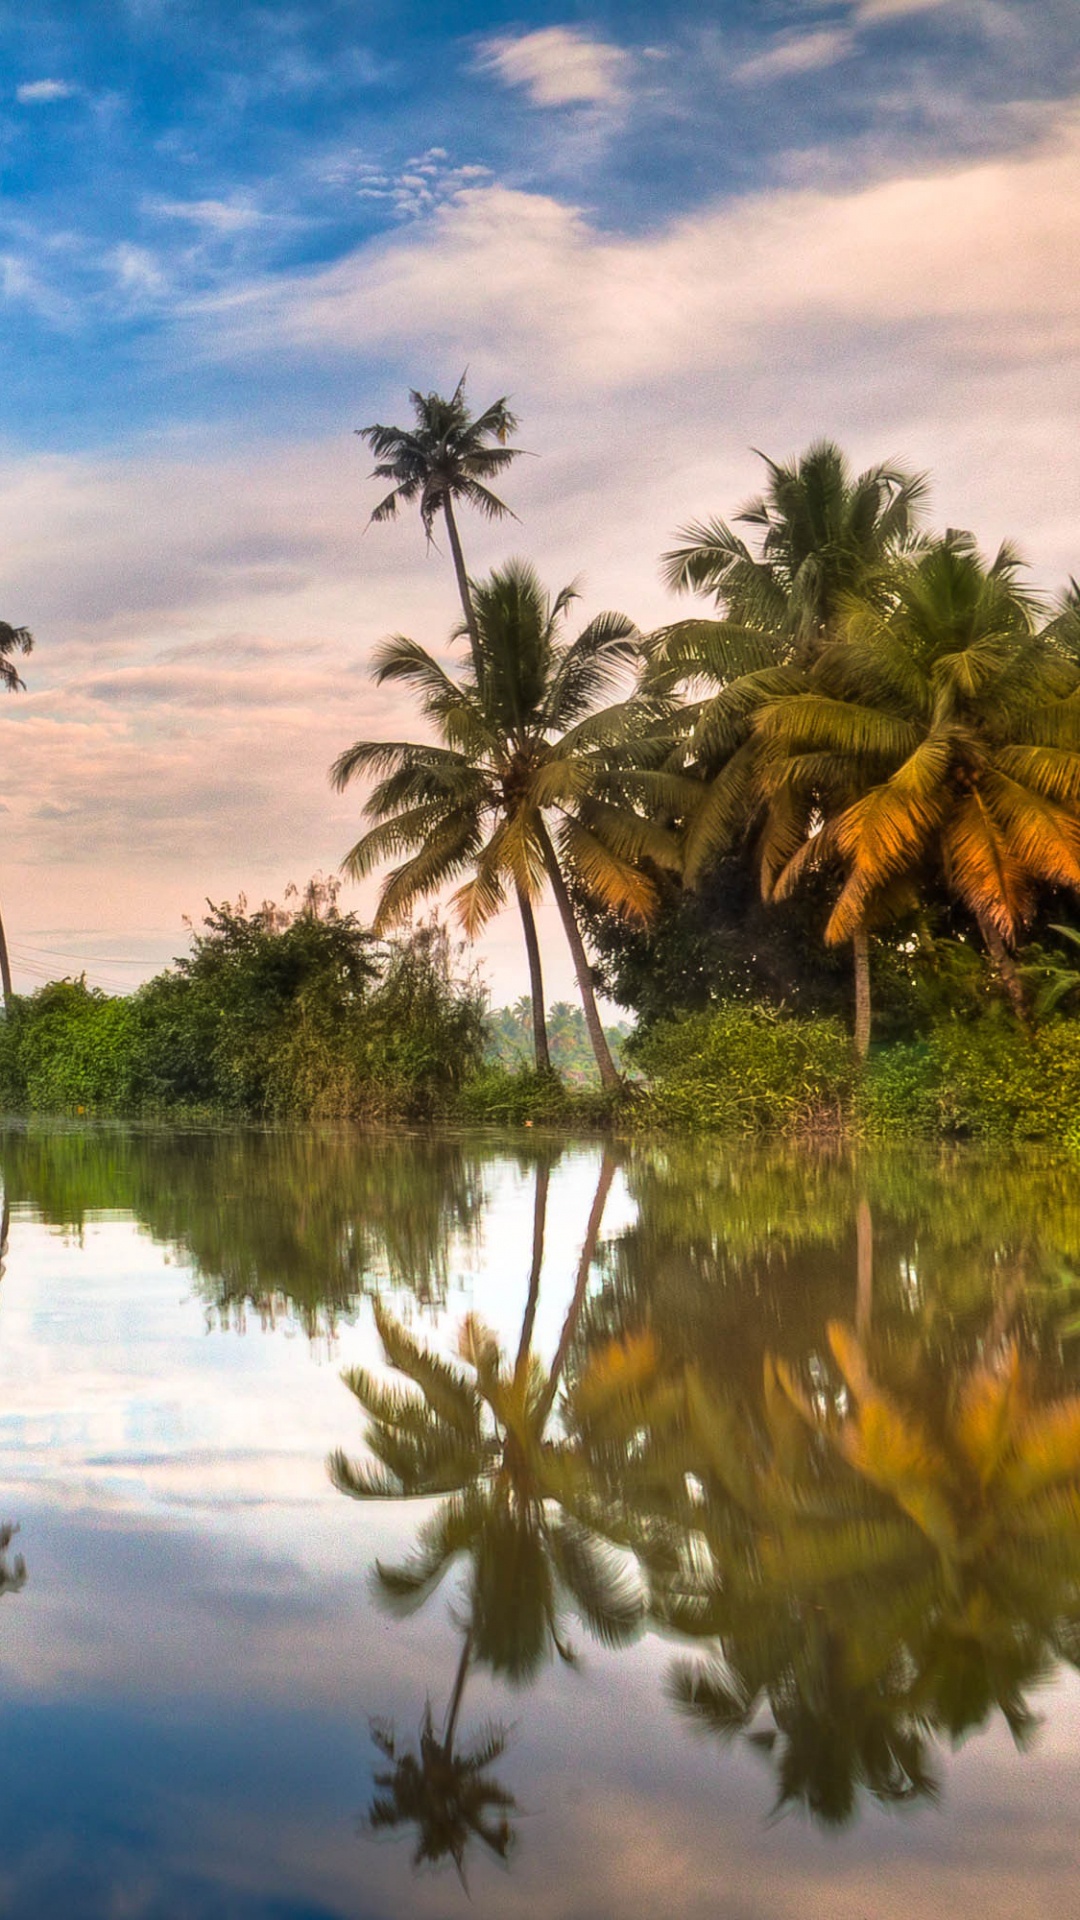 Green Palm Trees Beside Body of Water Under Blue Sky and White Clouds During Daytime. Wallpaper in 1080x1920 Resolution